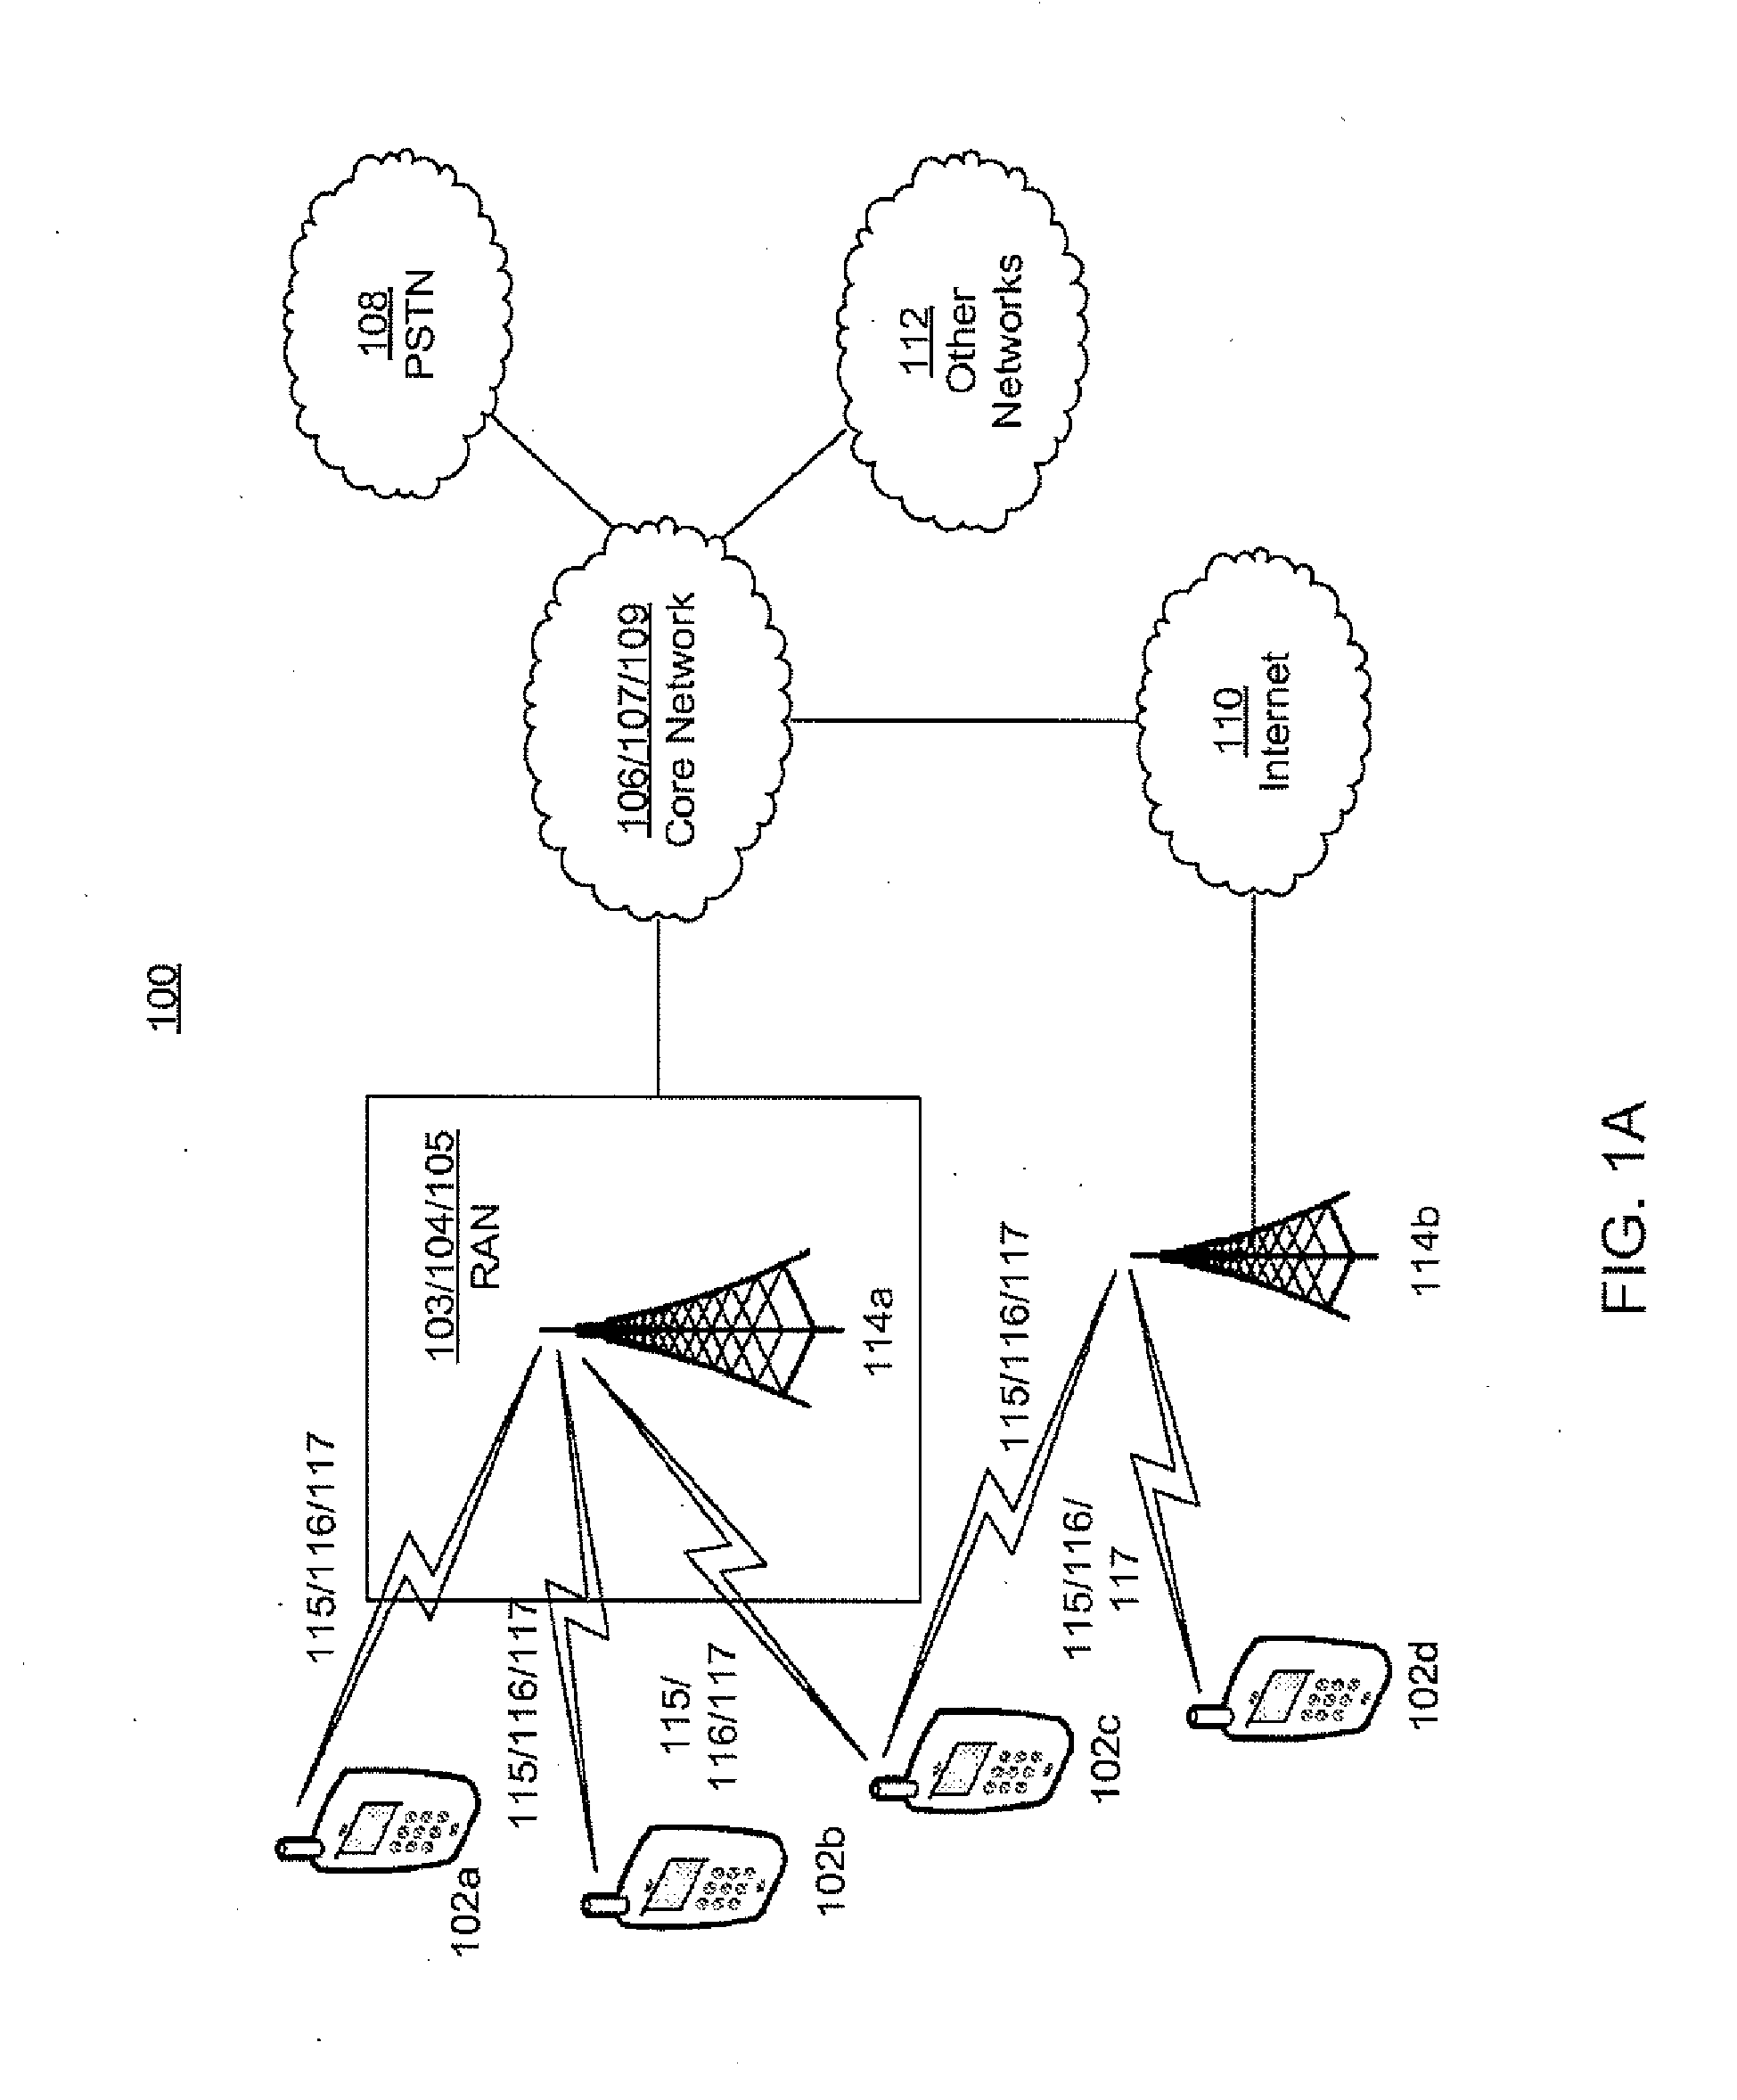 Transmission Power Control of User Equipment Communicating with Low Power Base Station and High Power Base Station